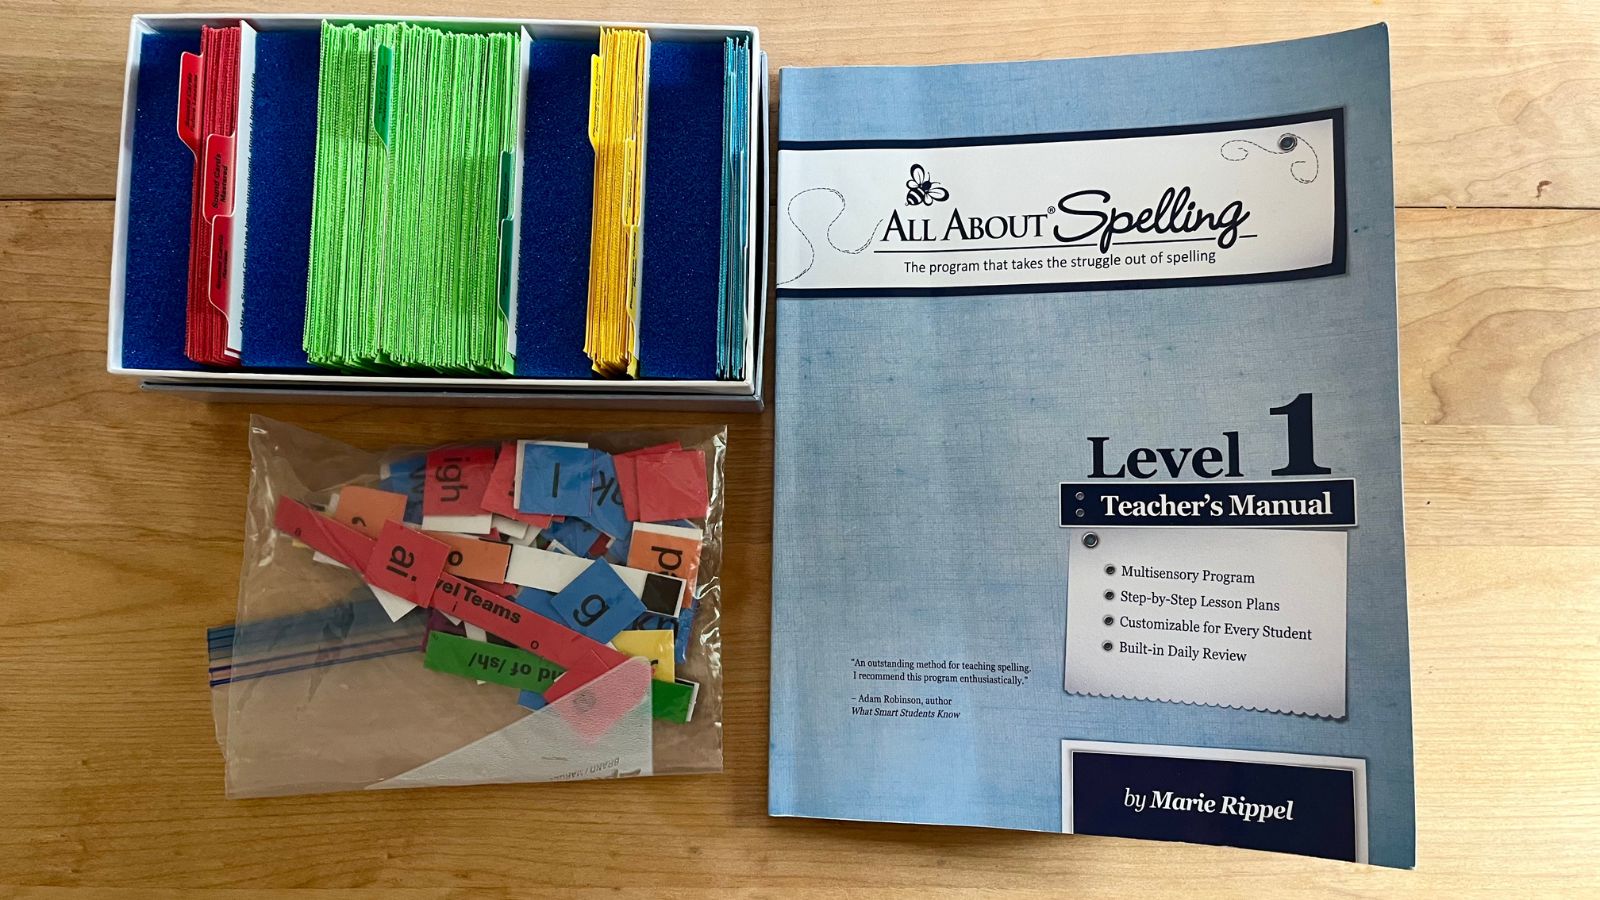 All About Spelling Level 1 materials including the teachers manual, flashcards from the student book, and magnetic tiles